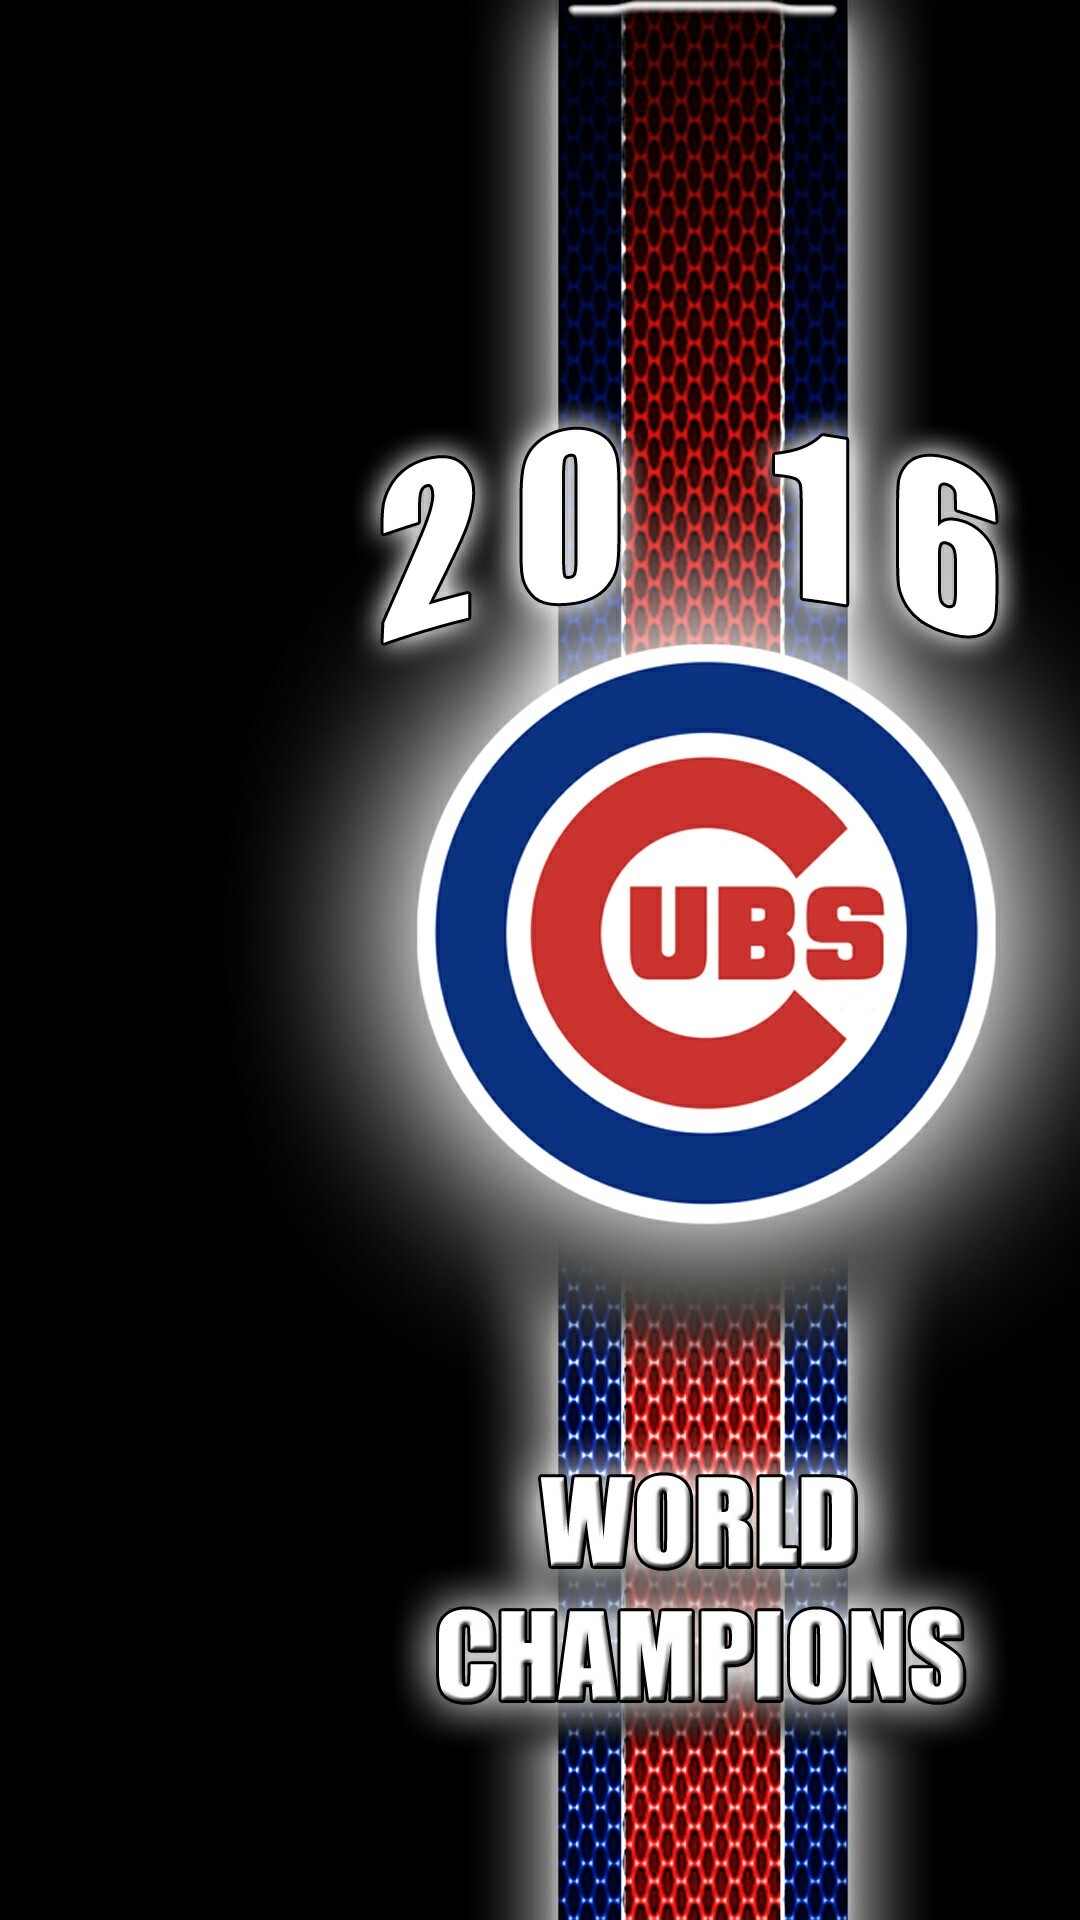 Chicago Cubs 2016 World Champions More